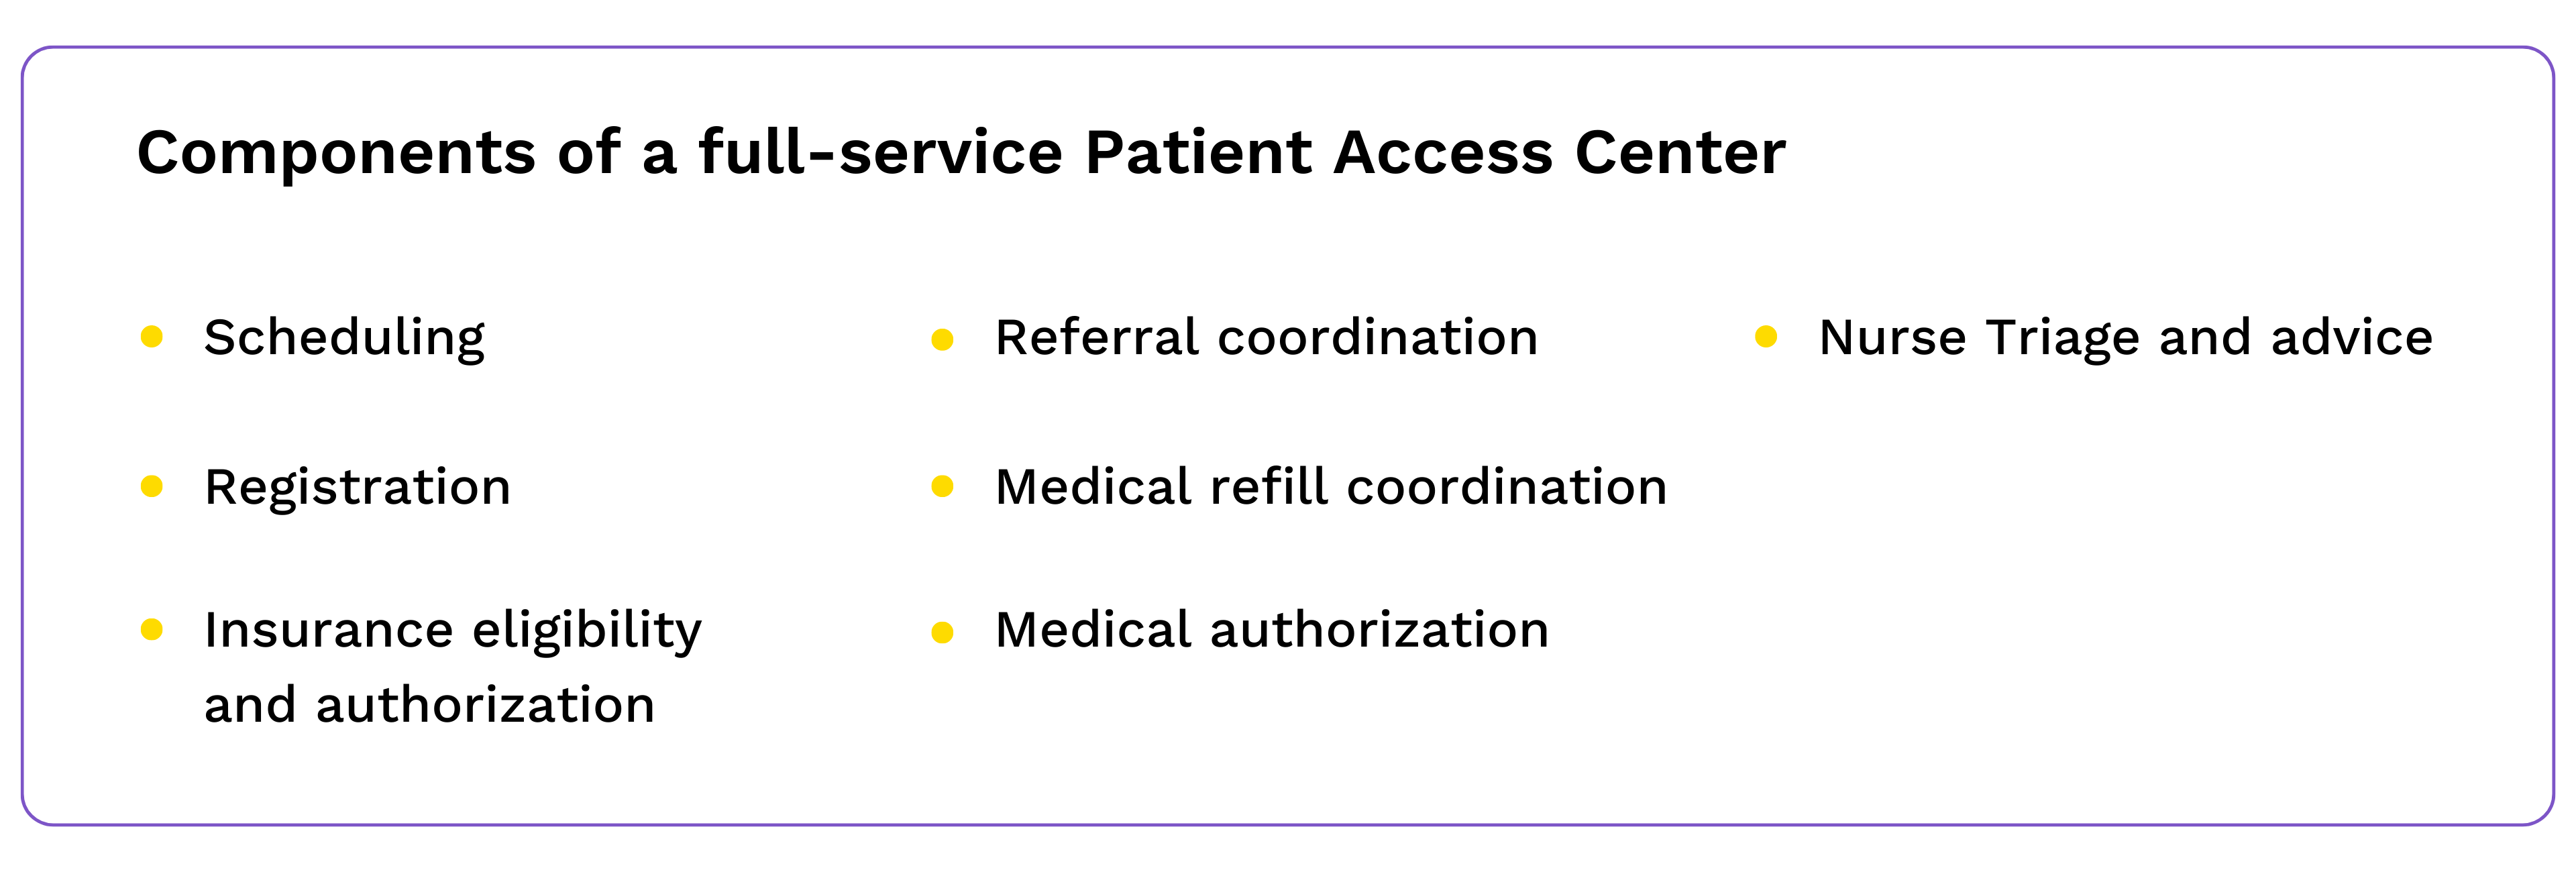 components-of-a-full-service-patient-access-center